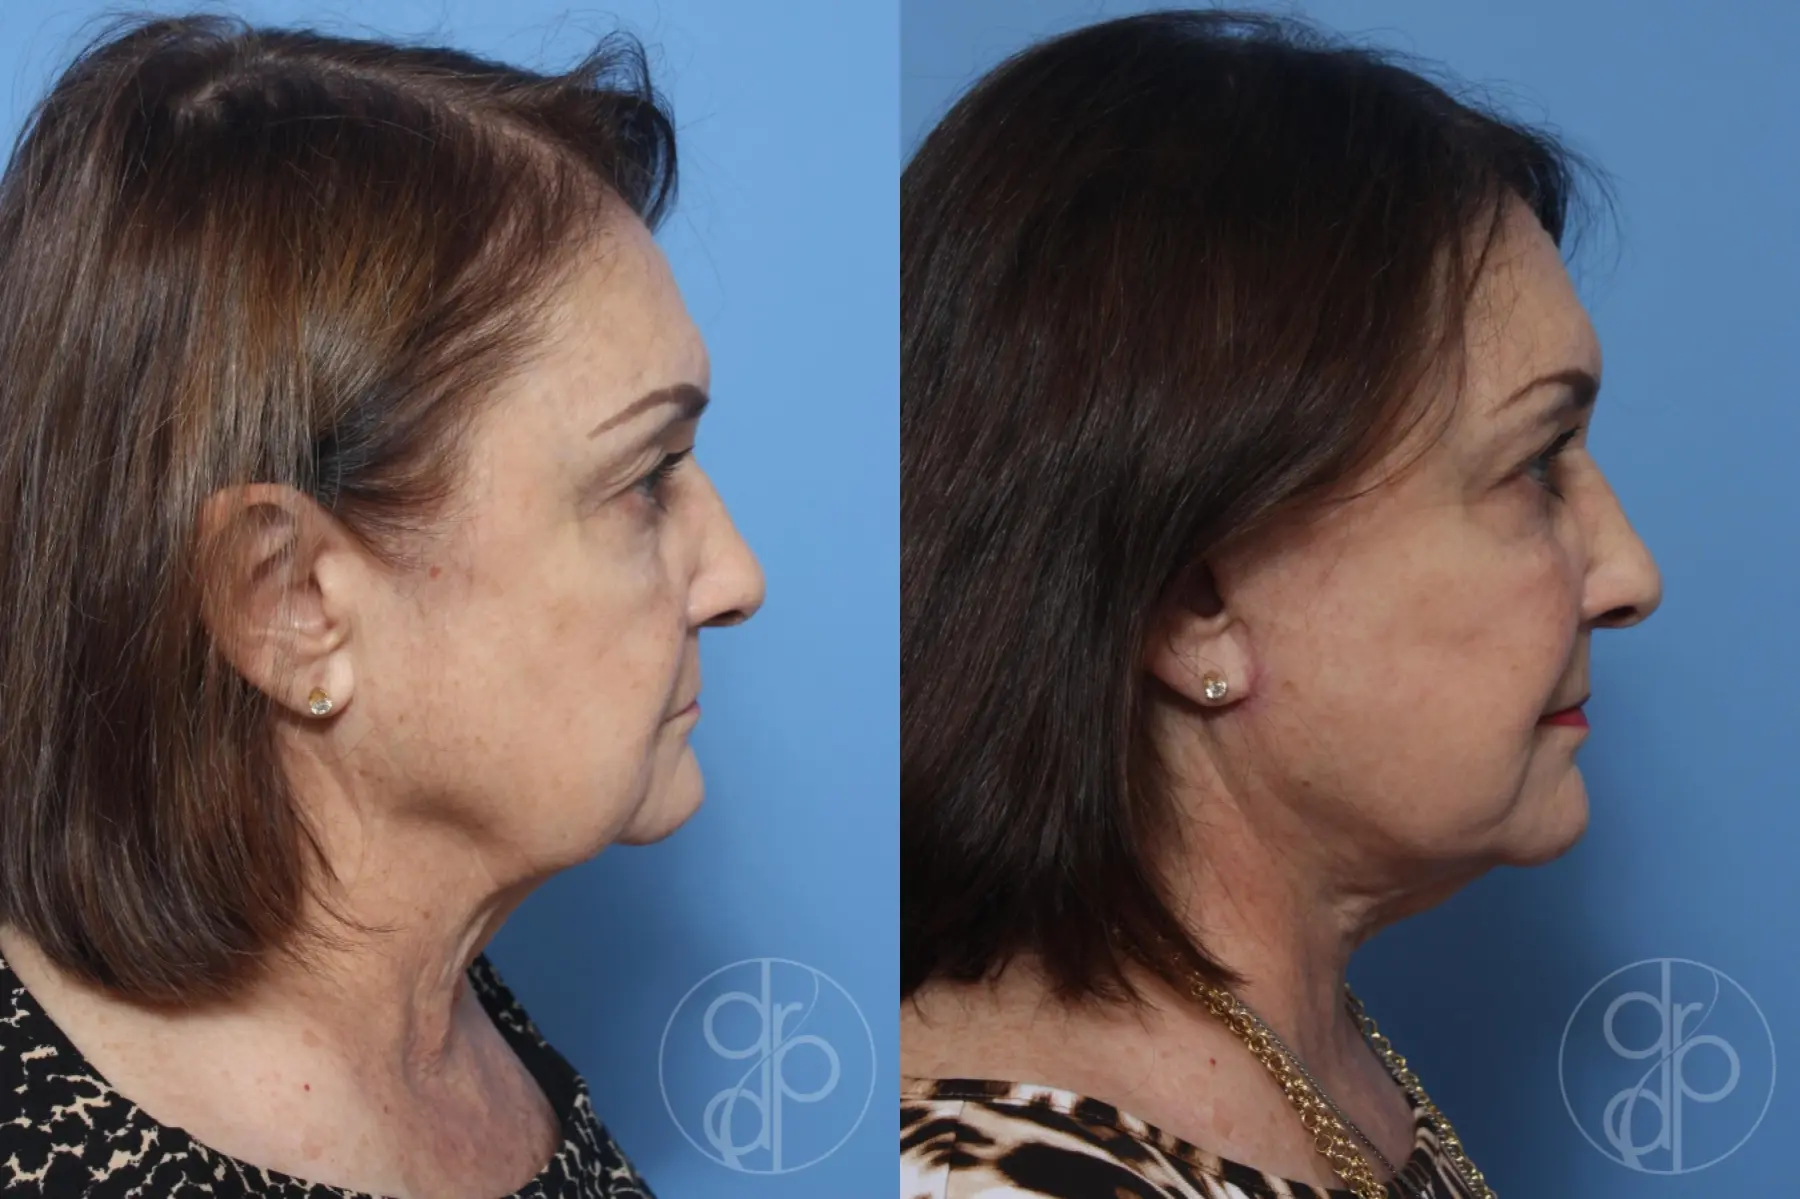 patient 12406 facelift before and after result - Before and After 4